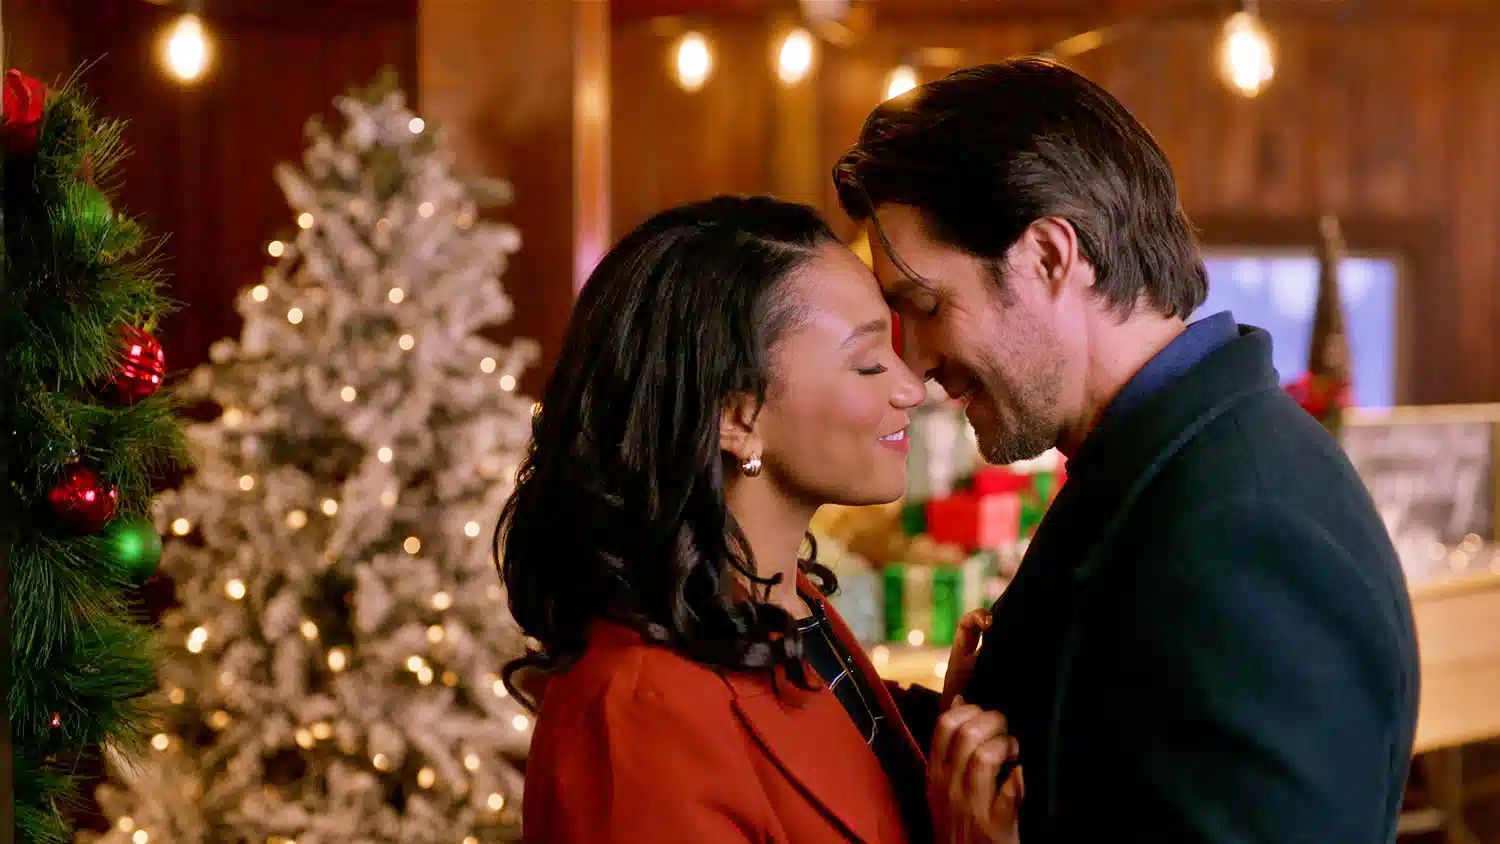 Mary Antonini and Peter Porte in Yuletide The Knot on UPtv